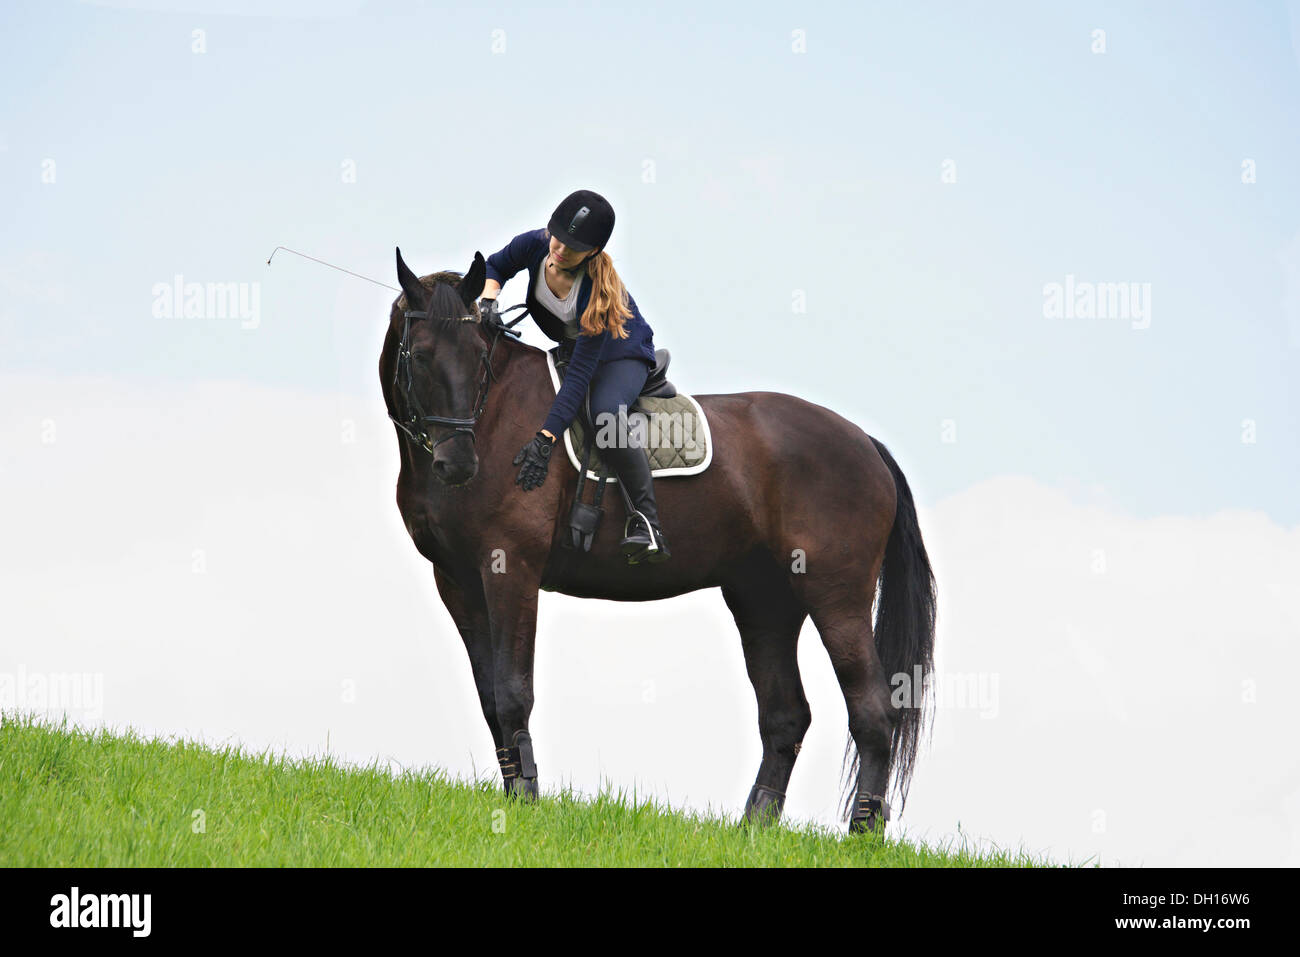 Woman Riding Horse in Rural Landscape, Baden Wuerttemberg, Germany, Europe Stock Photo